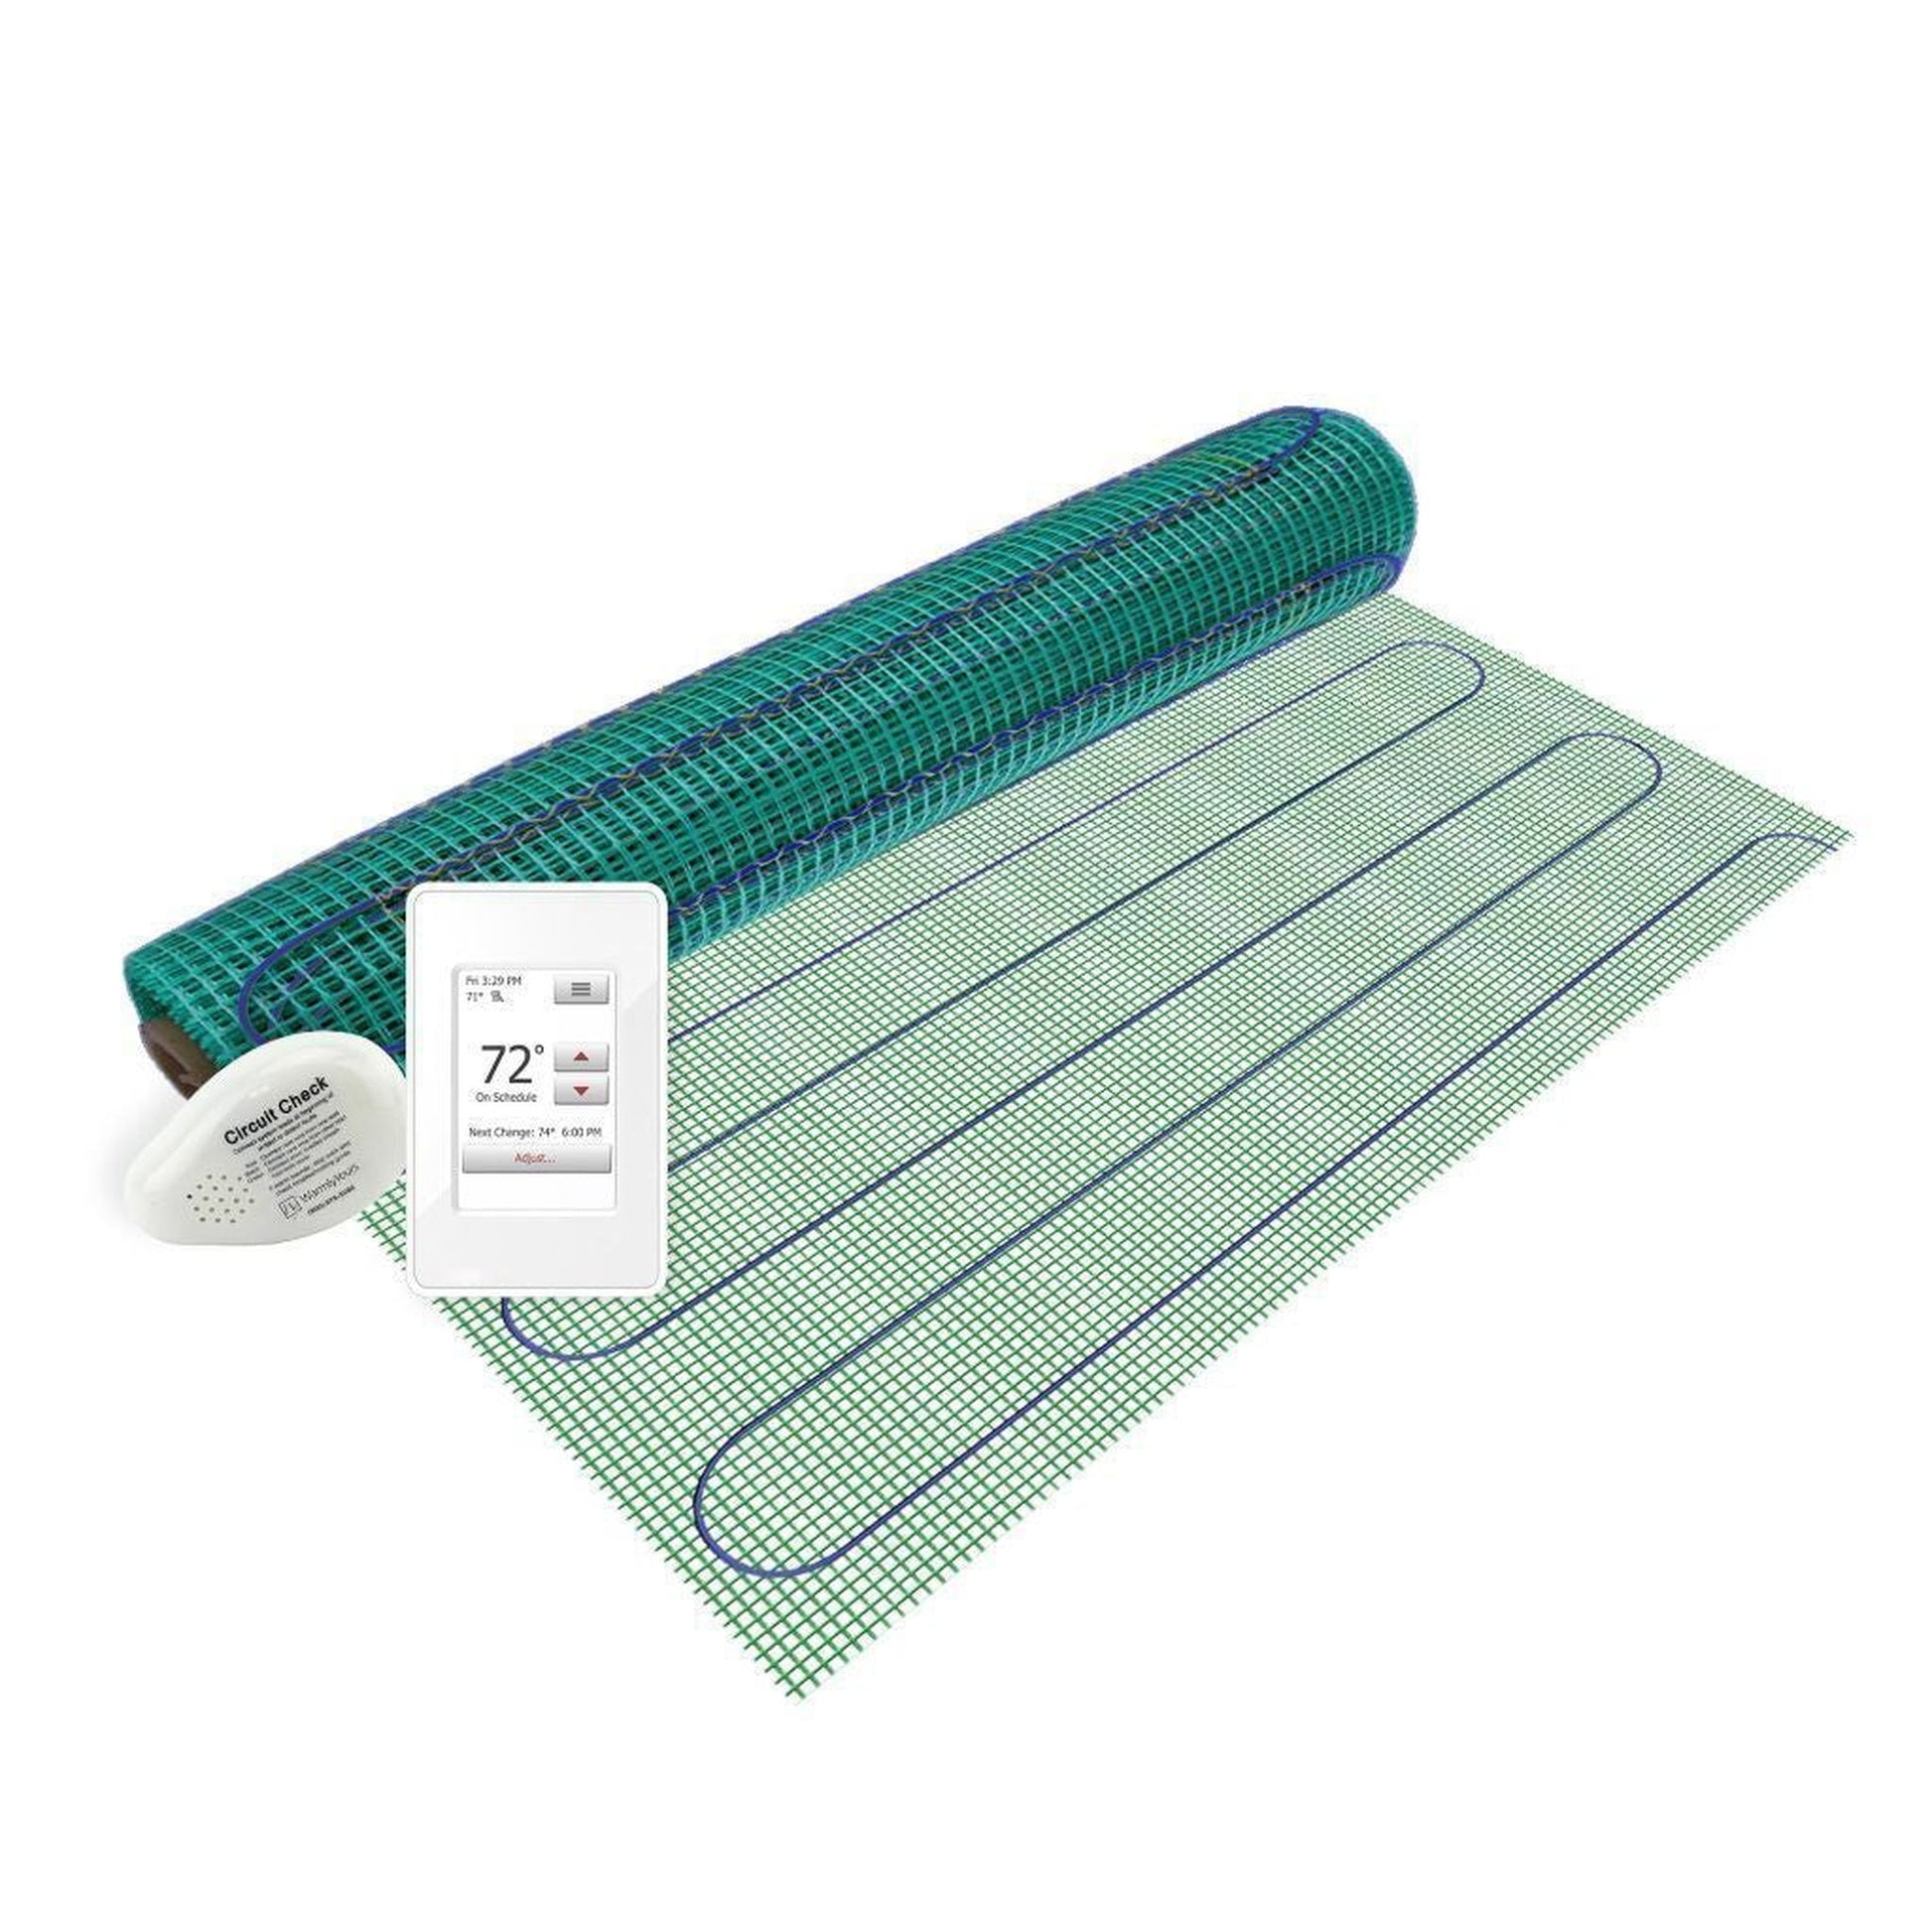 10 SQUARE FOOT MAT SYSTEM, 20 WIDE X 6' LONG, 120V - Warming